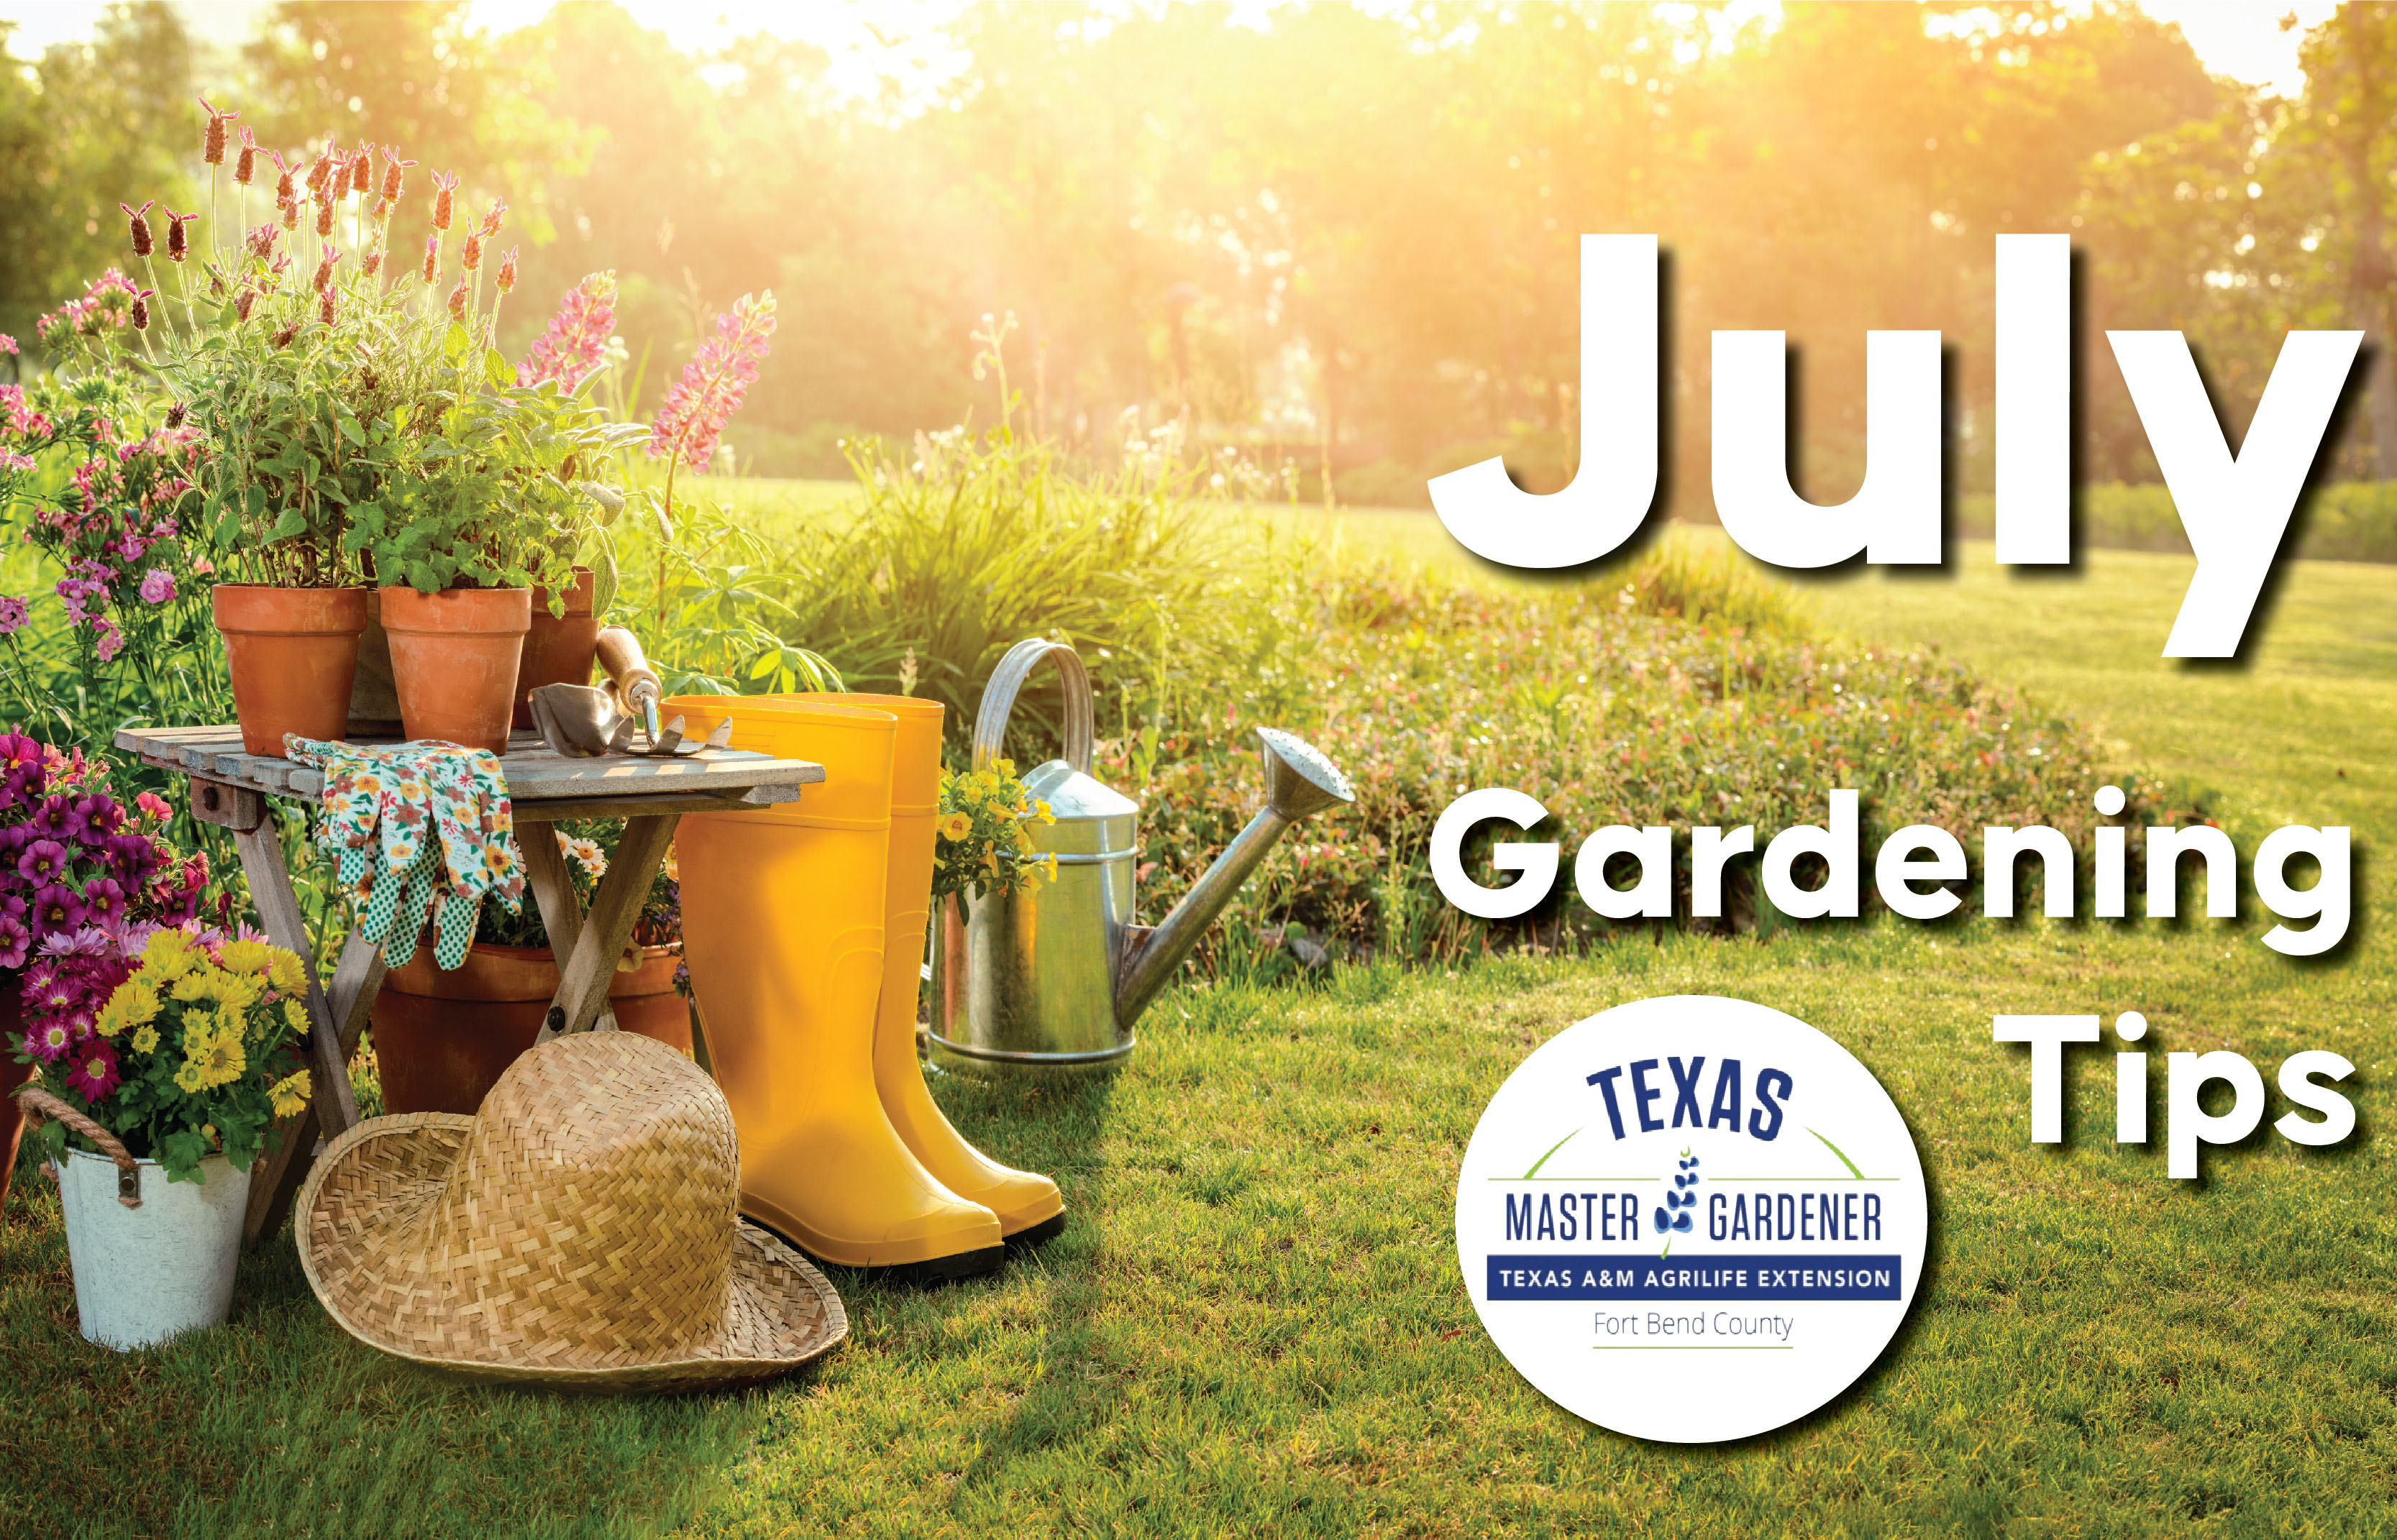 Fort Bend County Master Gardeners Shares July Gardening Tips